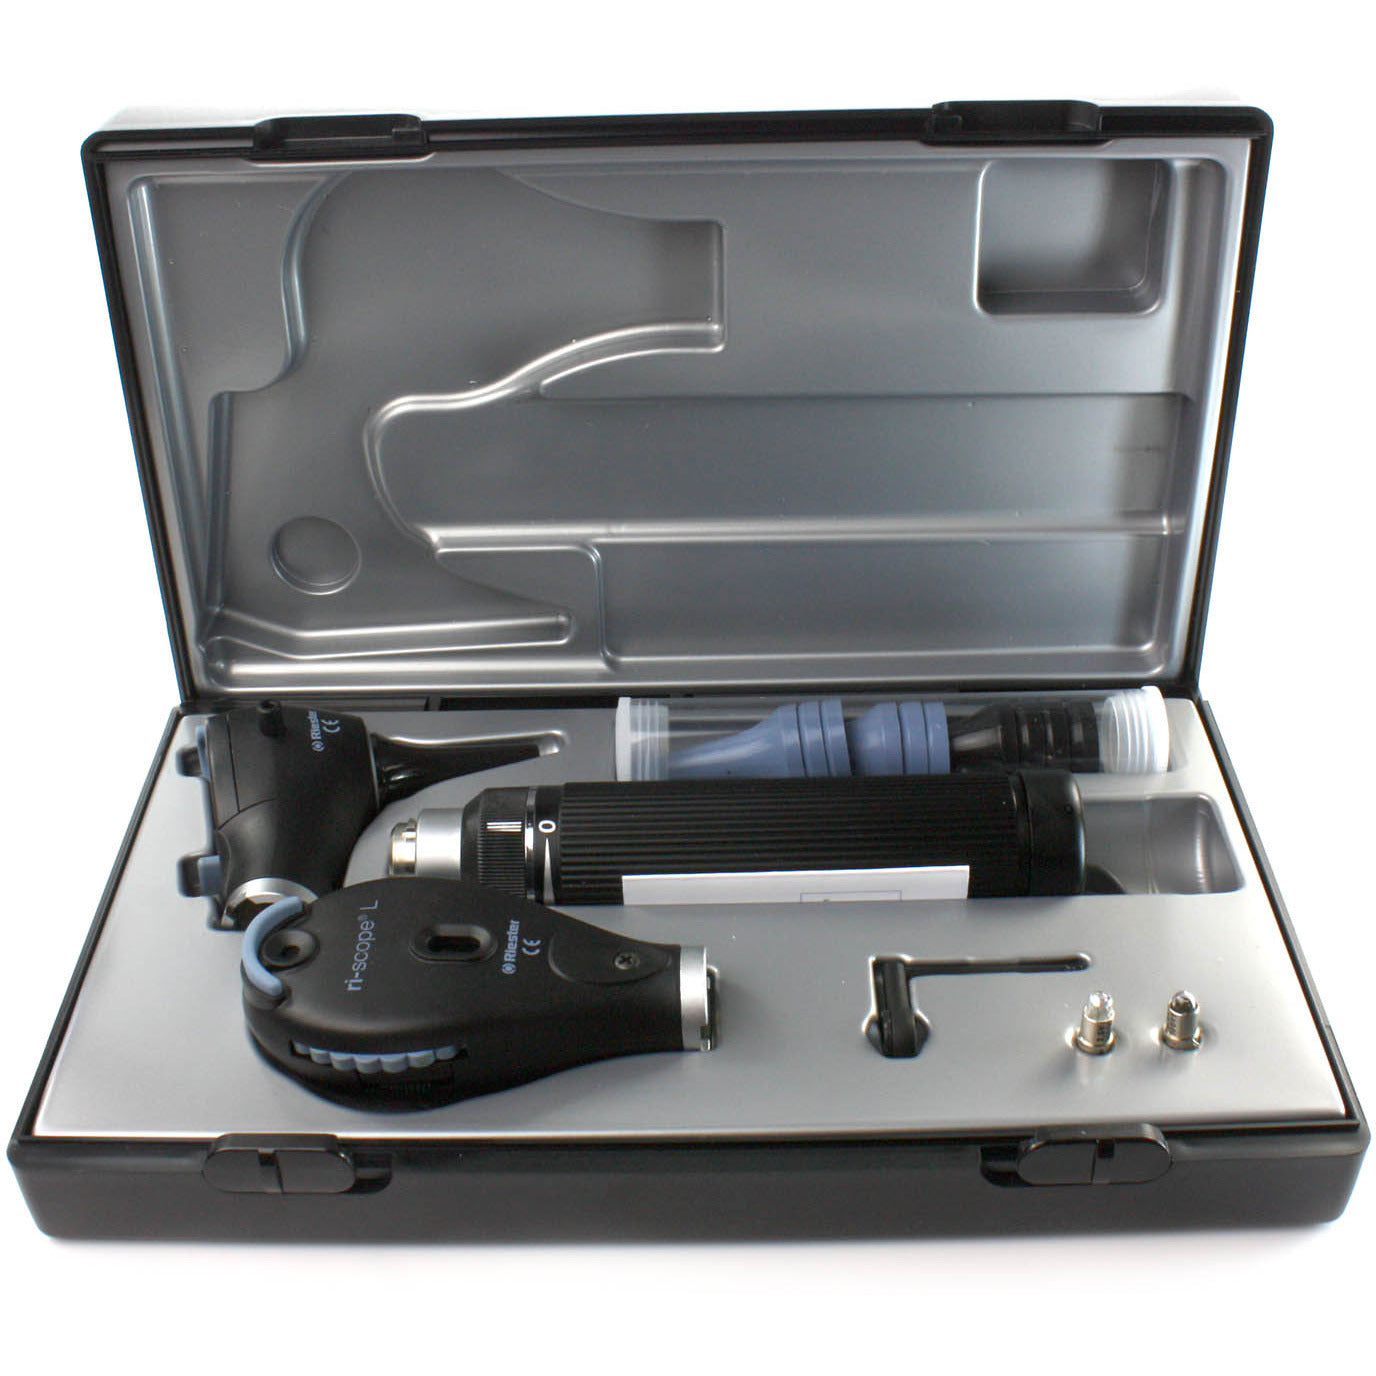 Riester Ri-scope L3 Otoscope and Ophthalmoscope 3.5V LED Set